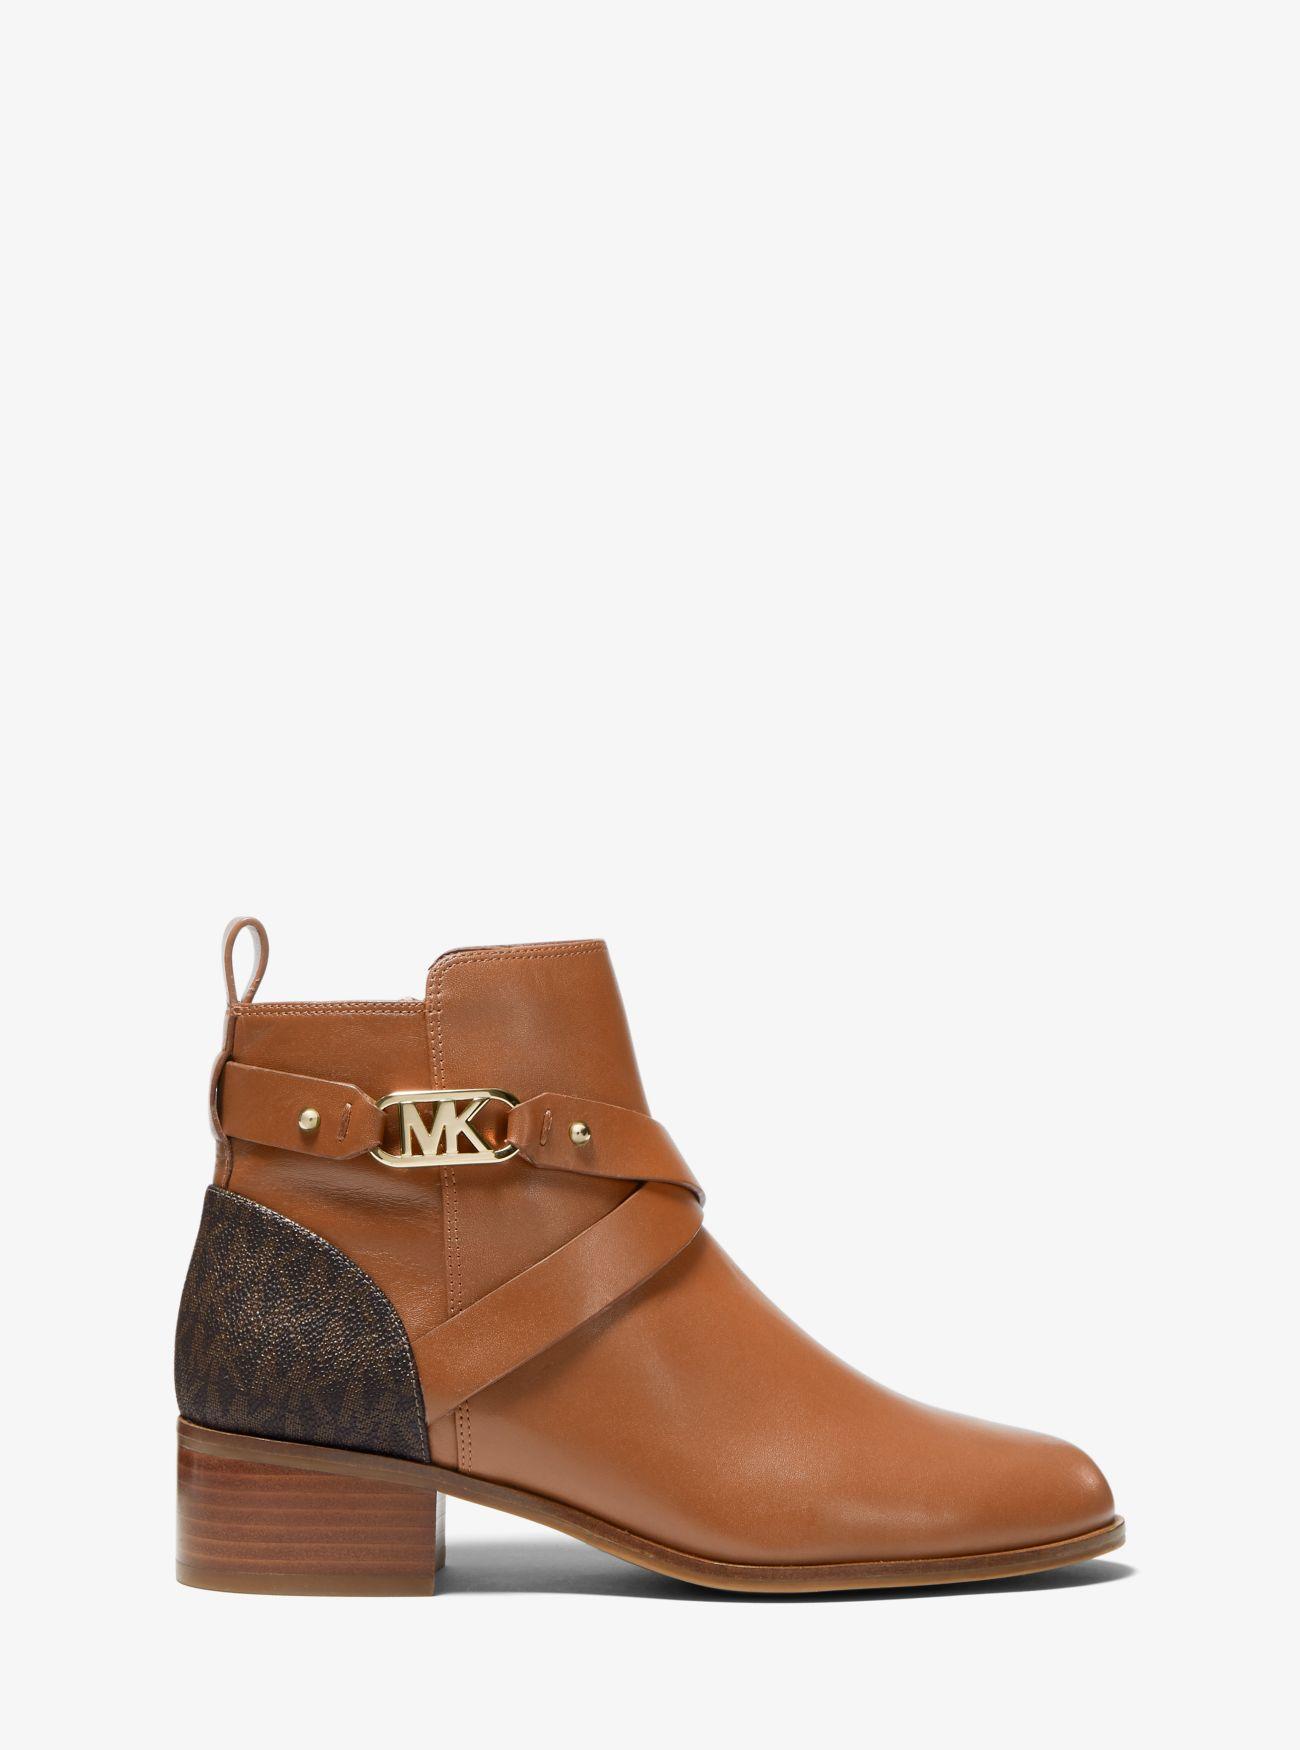 Michael Kors Kincaid Leather Ankle Boot in Brown - Lyst